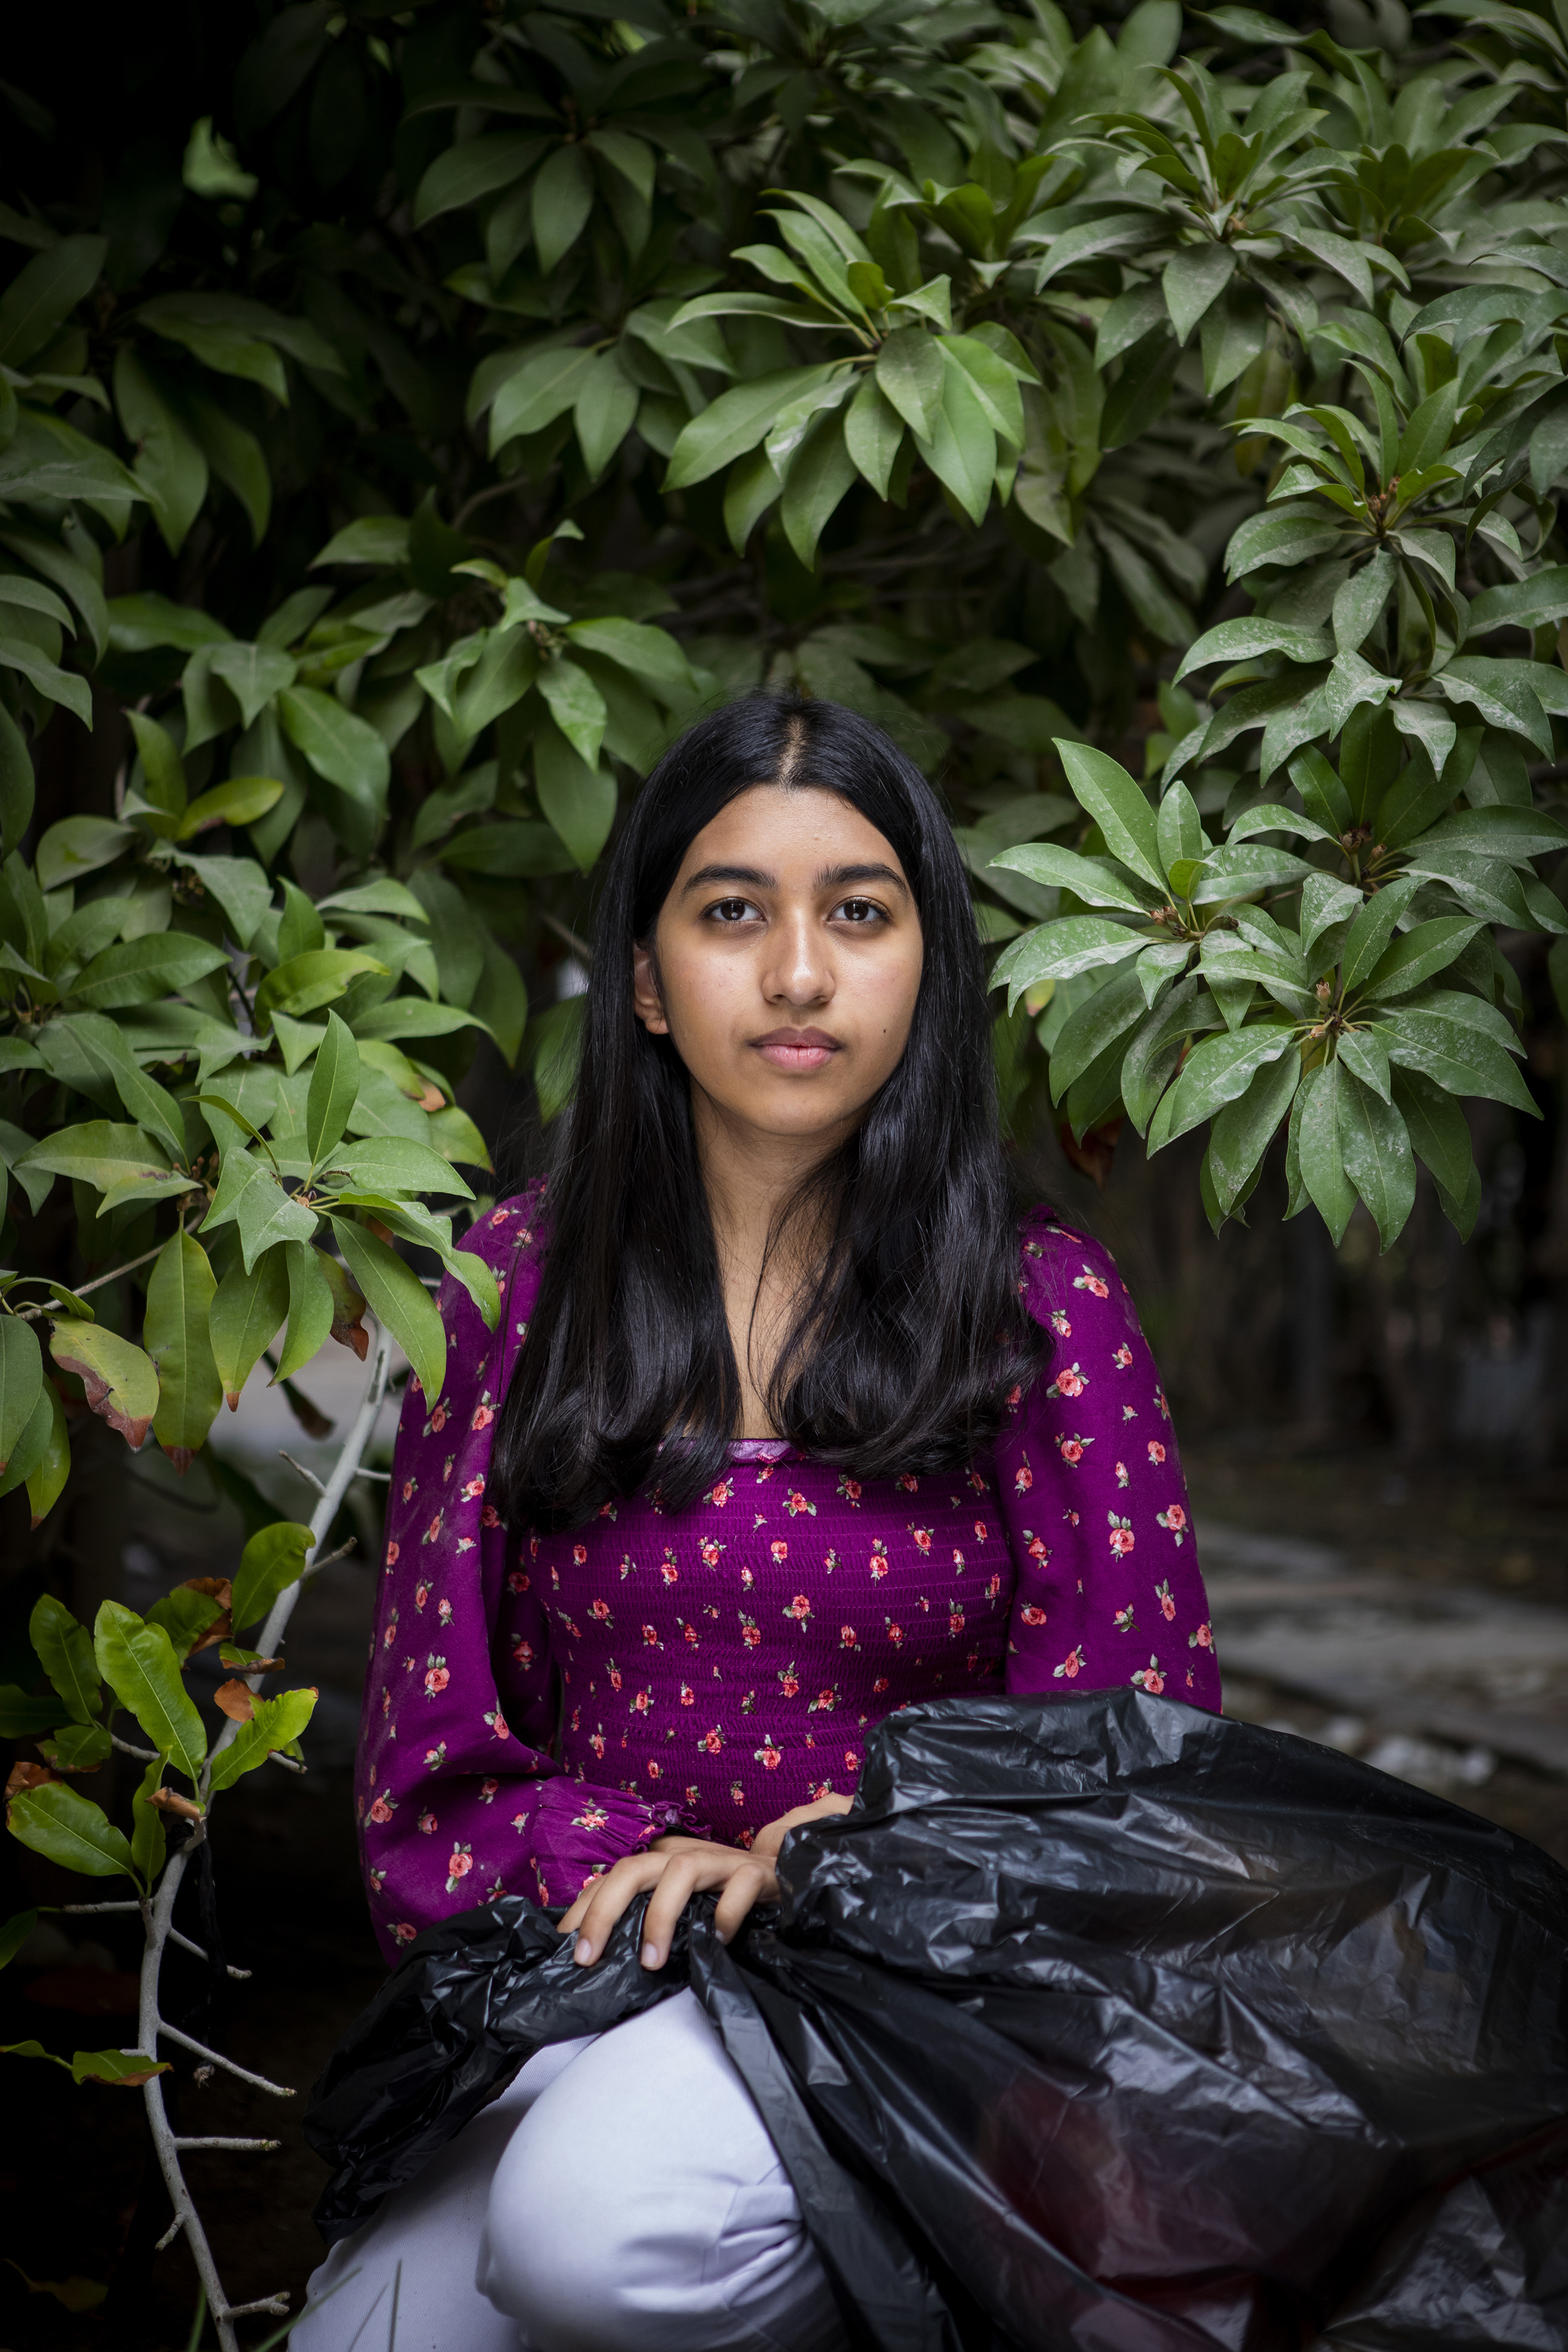 Sagarika Sriram, a teen climate activist, photographed outside her home on December 29th, 2021. (Natalie Naccache for TIME)